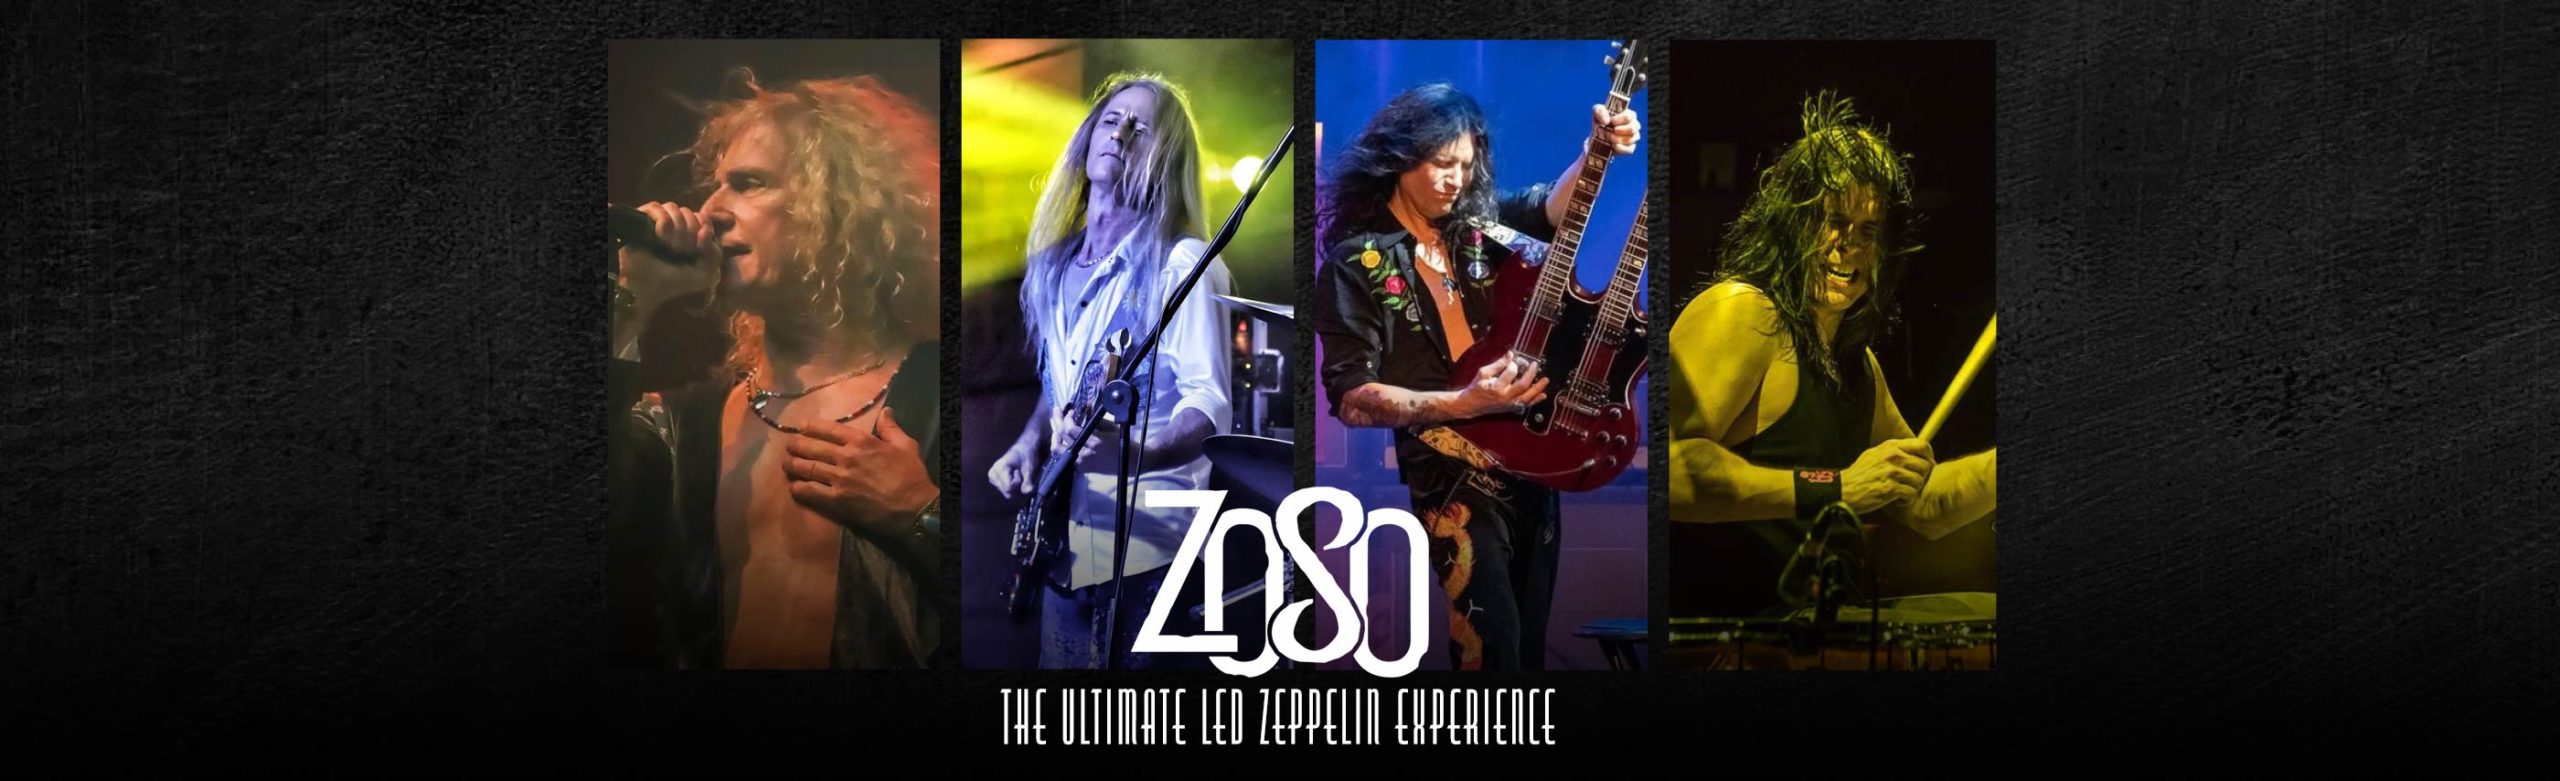 Rock Like It’s 1973 with Zoso – The Ultimate Led Zeppelin Experience at The ELM Image